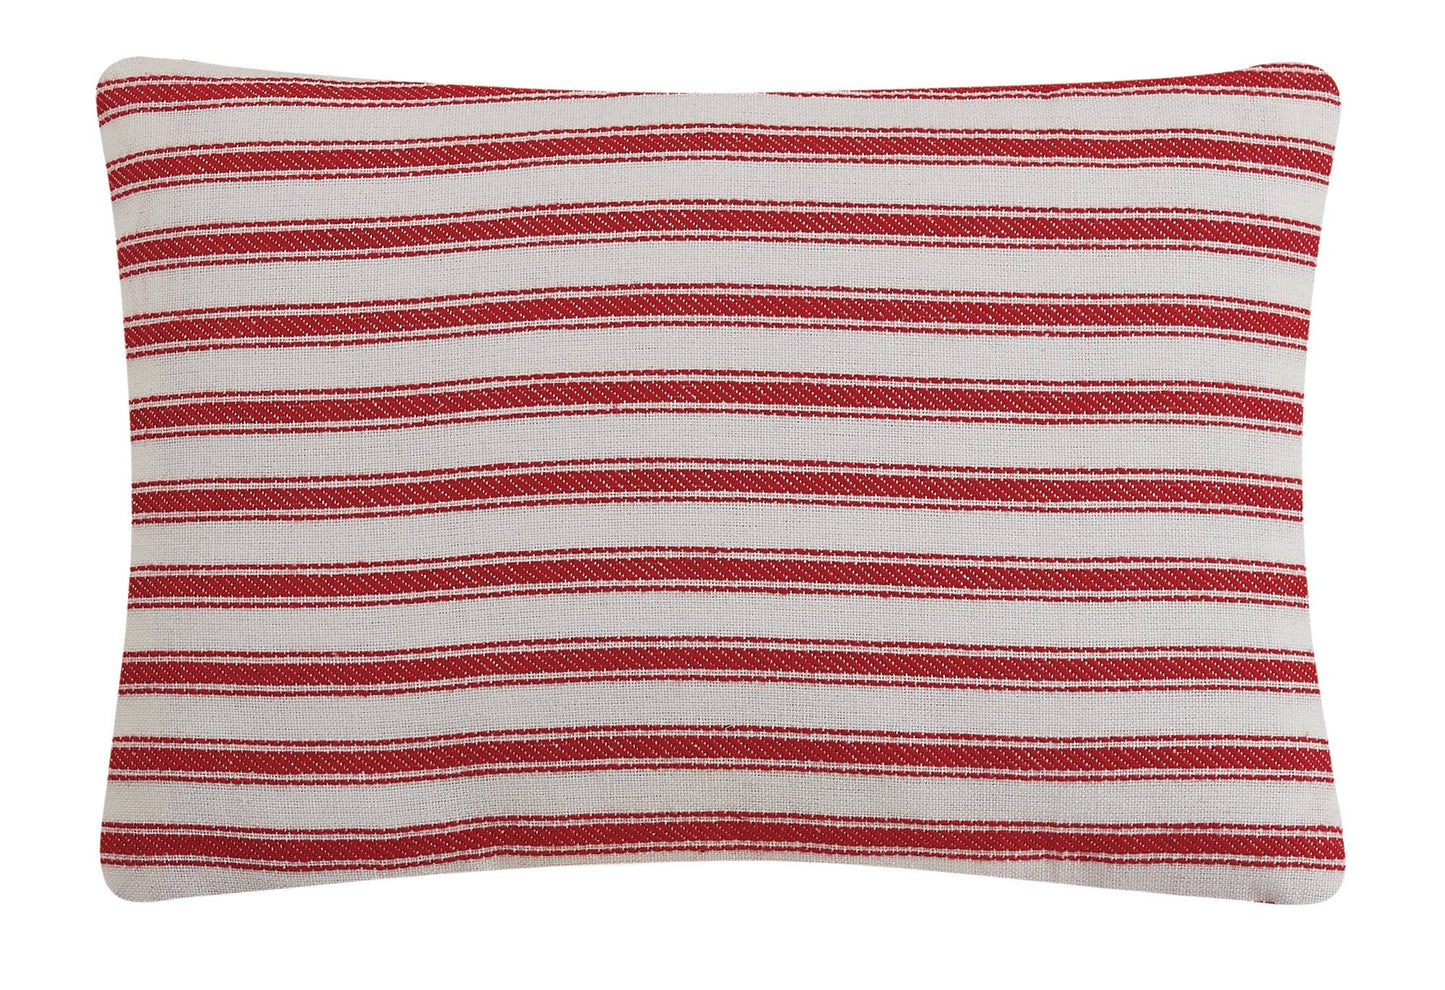 Flag Embroidered Pillow